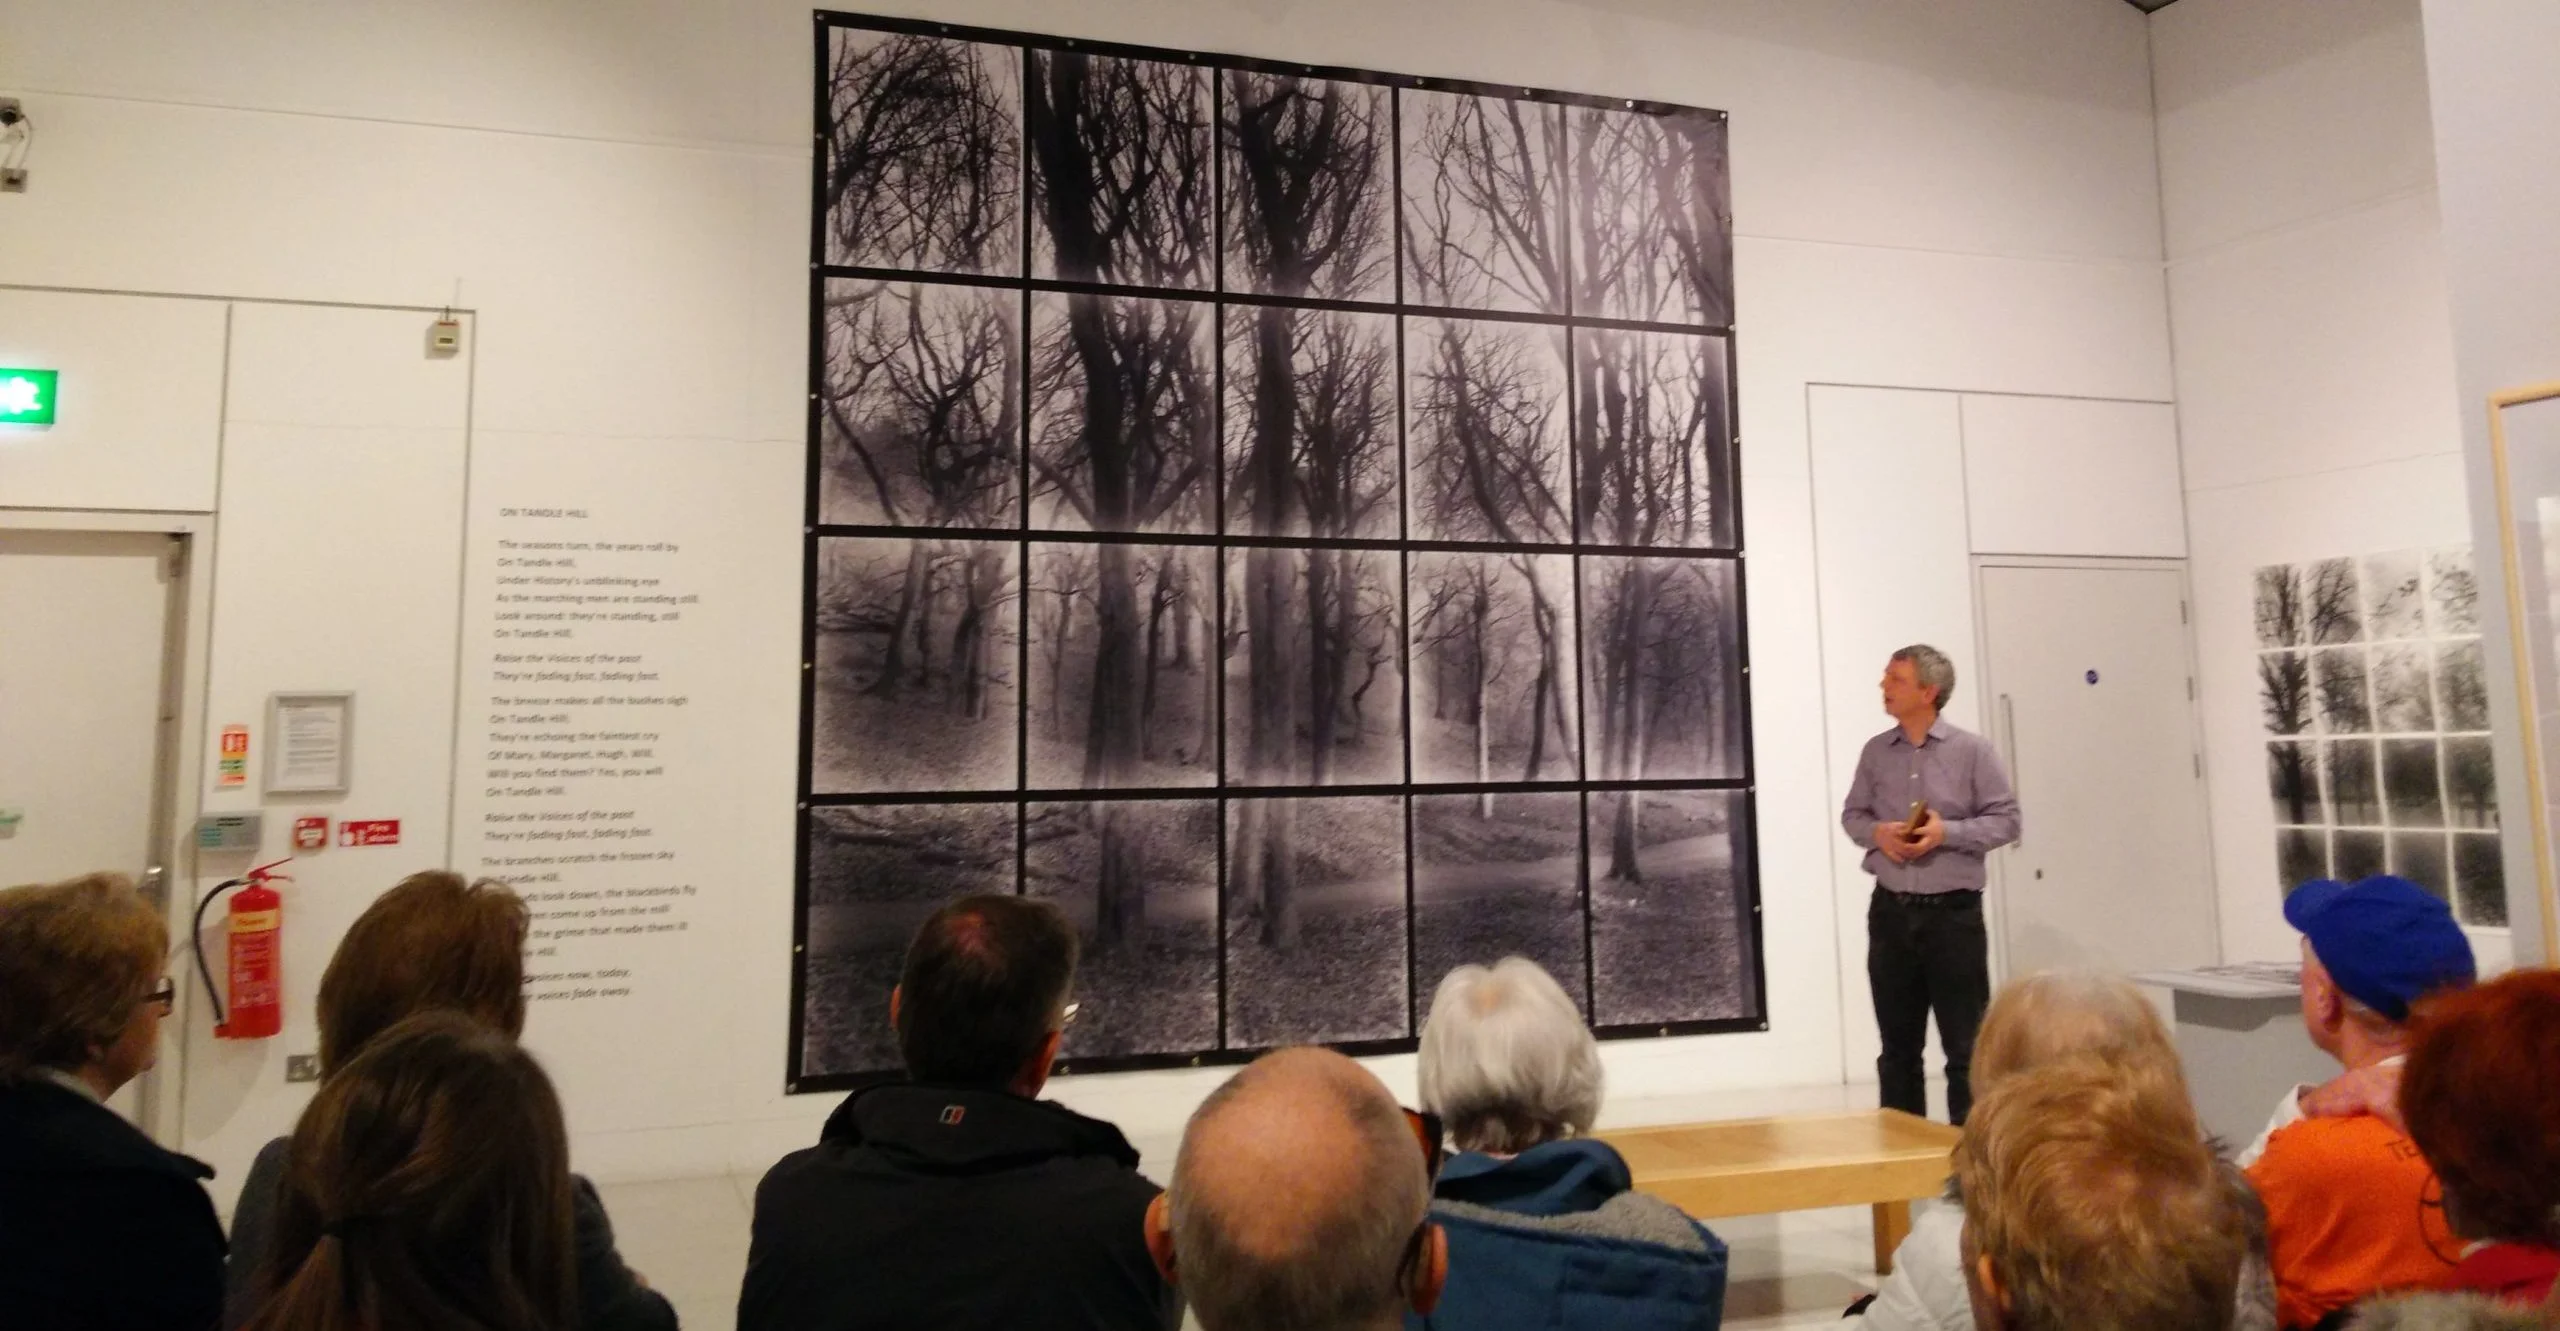 A tall paneled photographic exhibition with a man stood to the side giving a talk